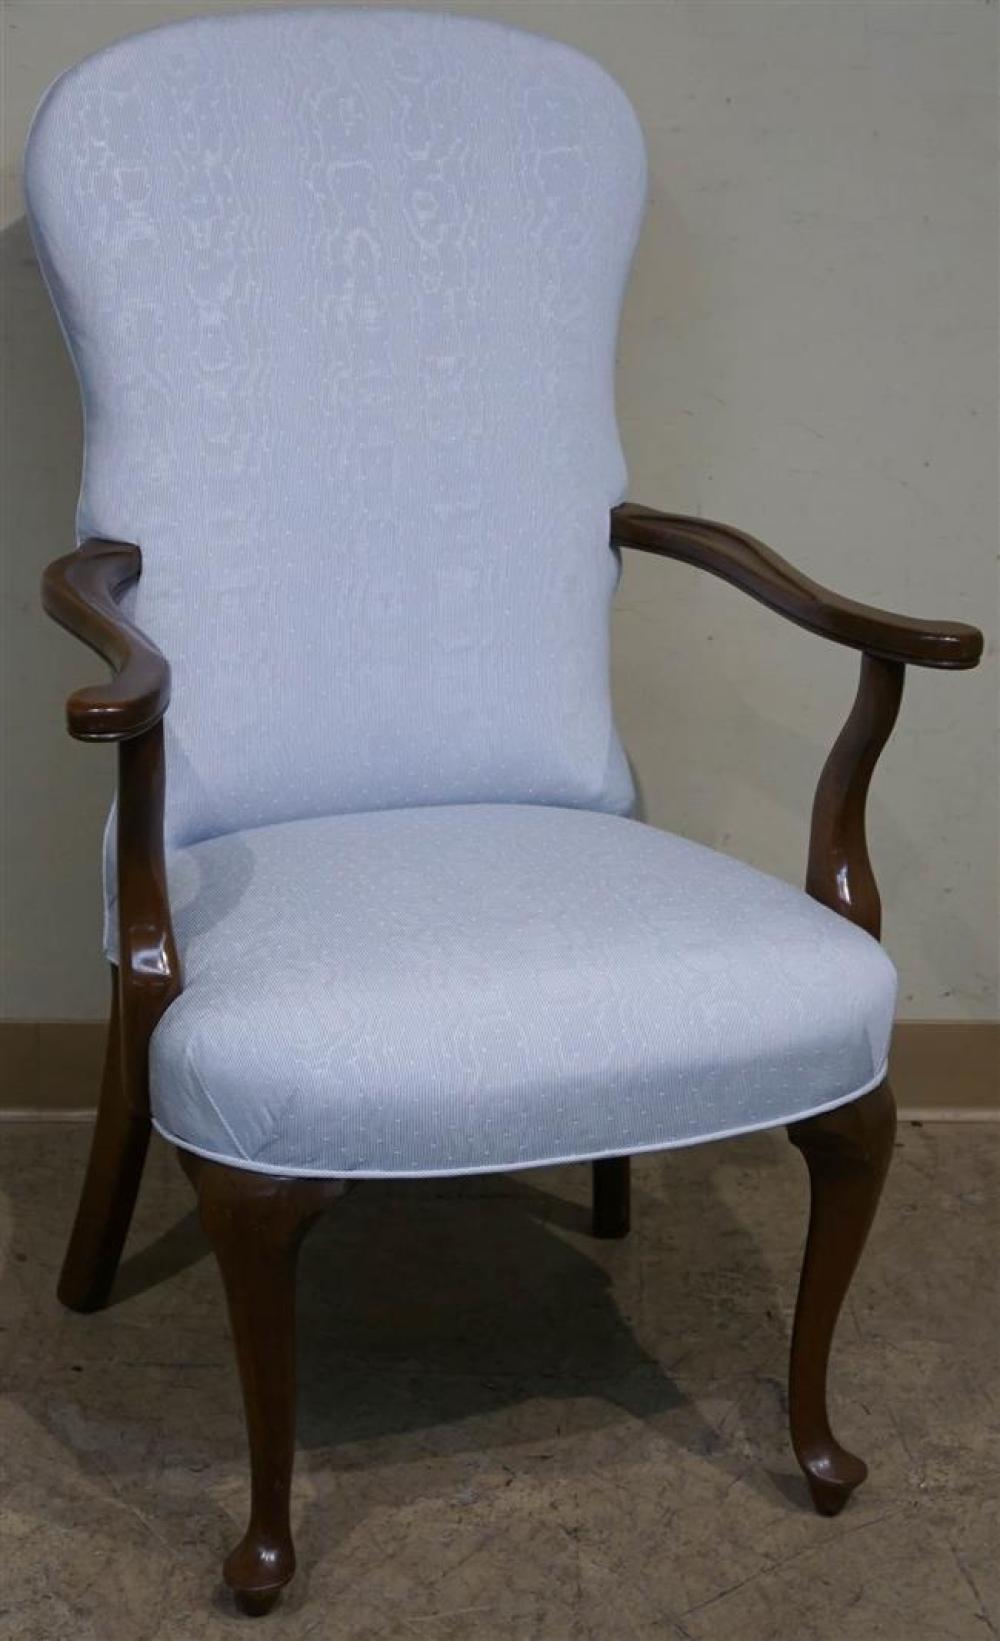 QUEEN ANNE STYLE MAHOGANY UPHOLSTERED